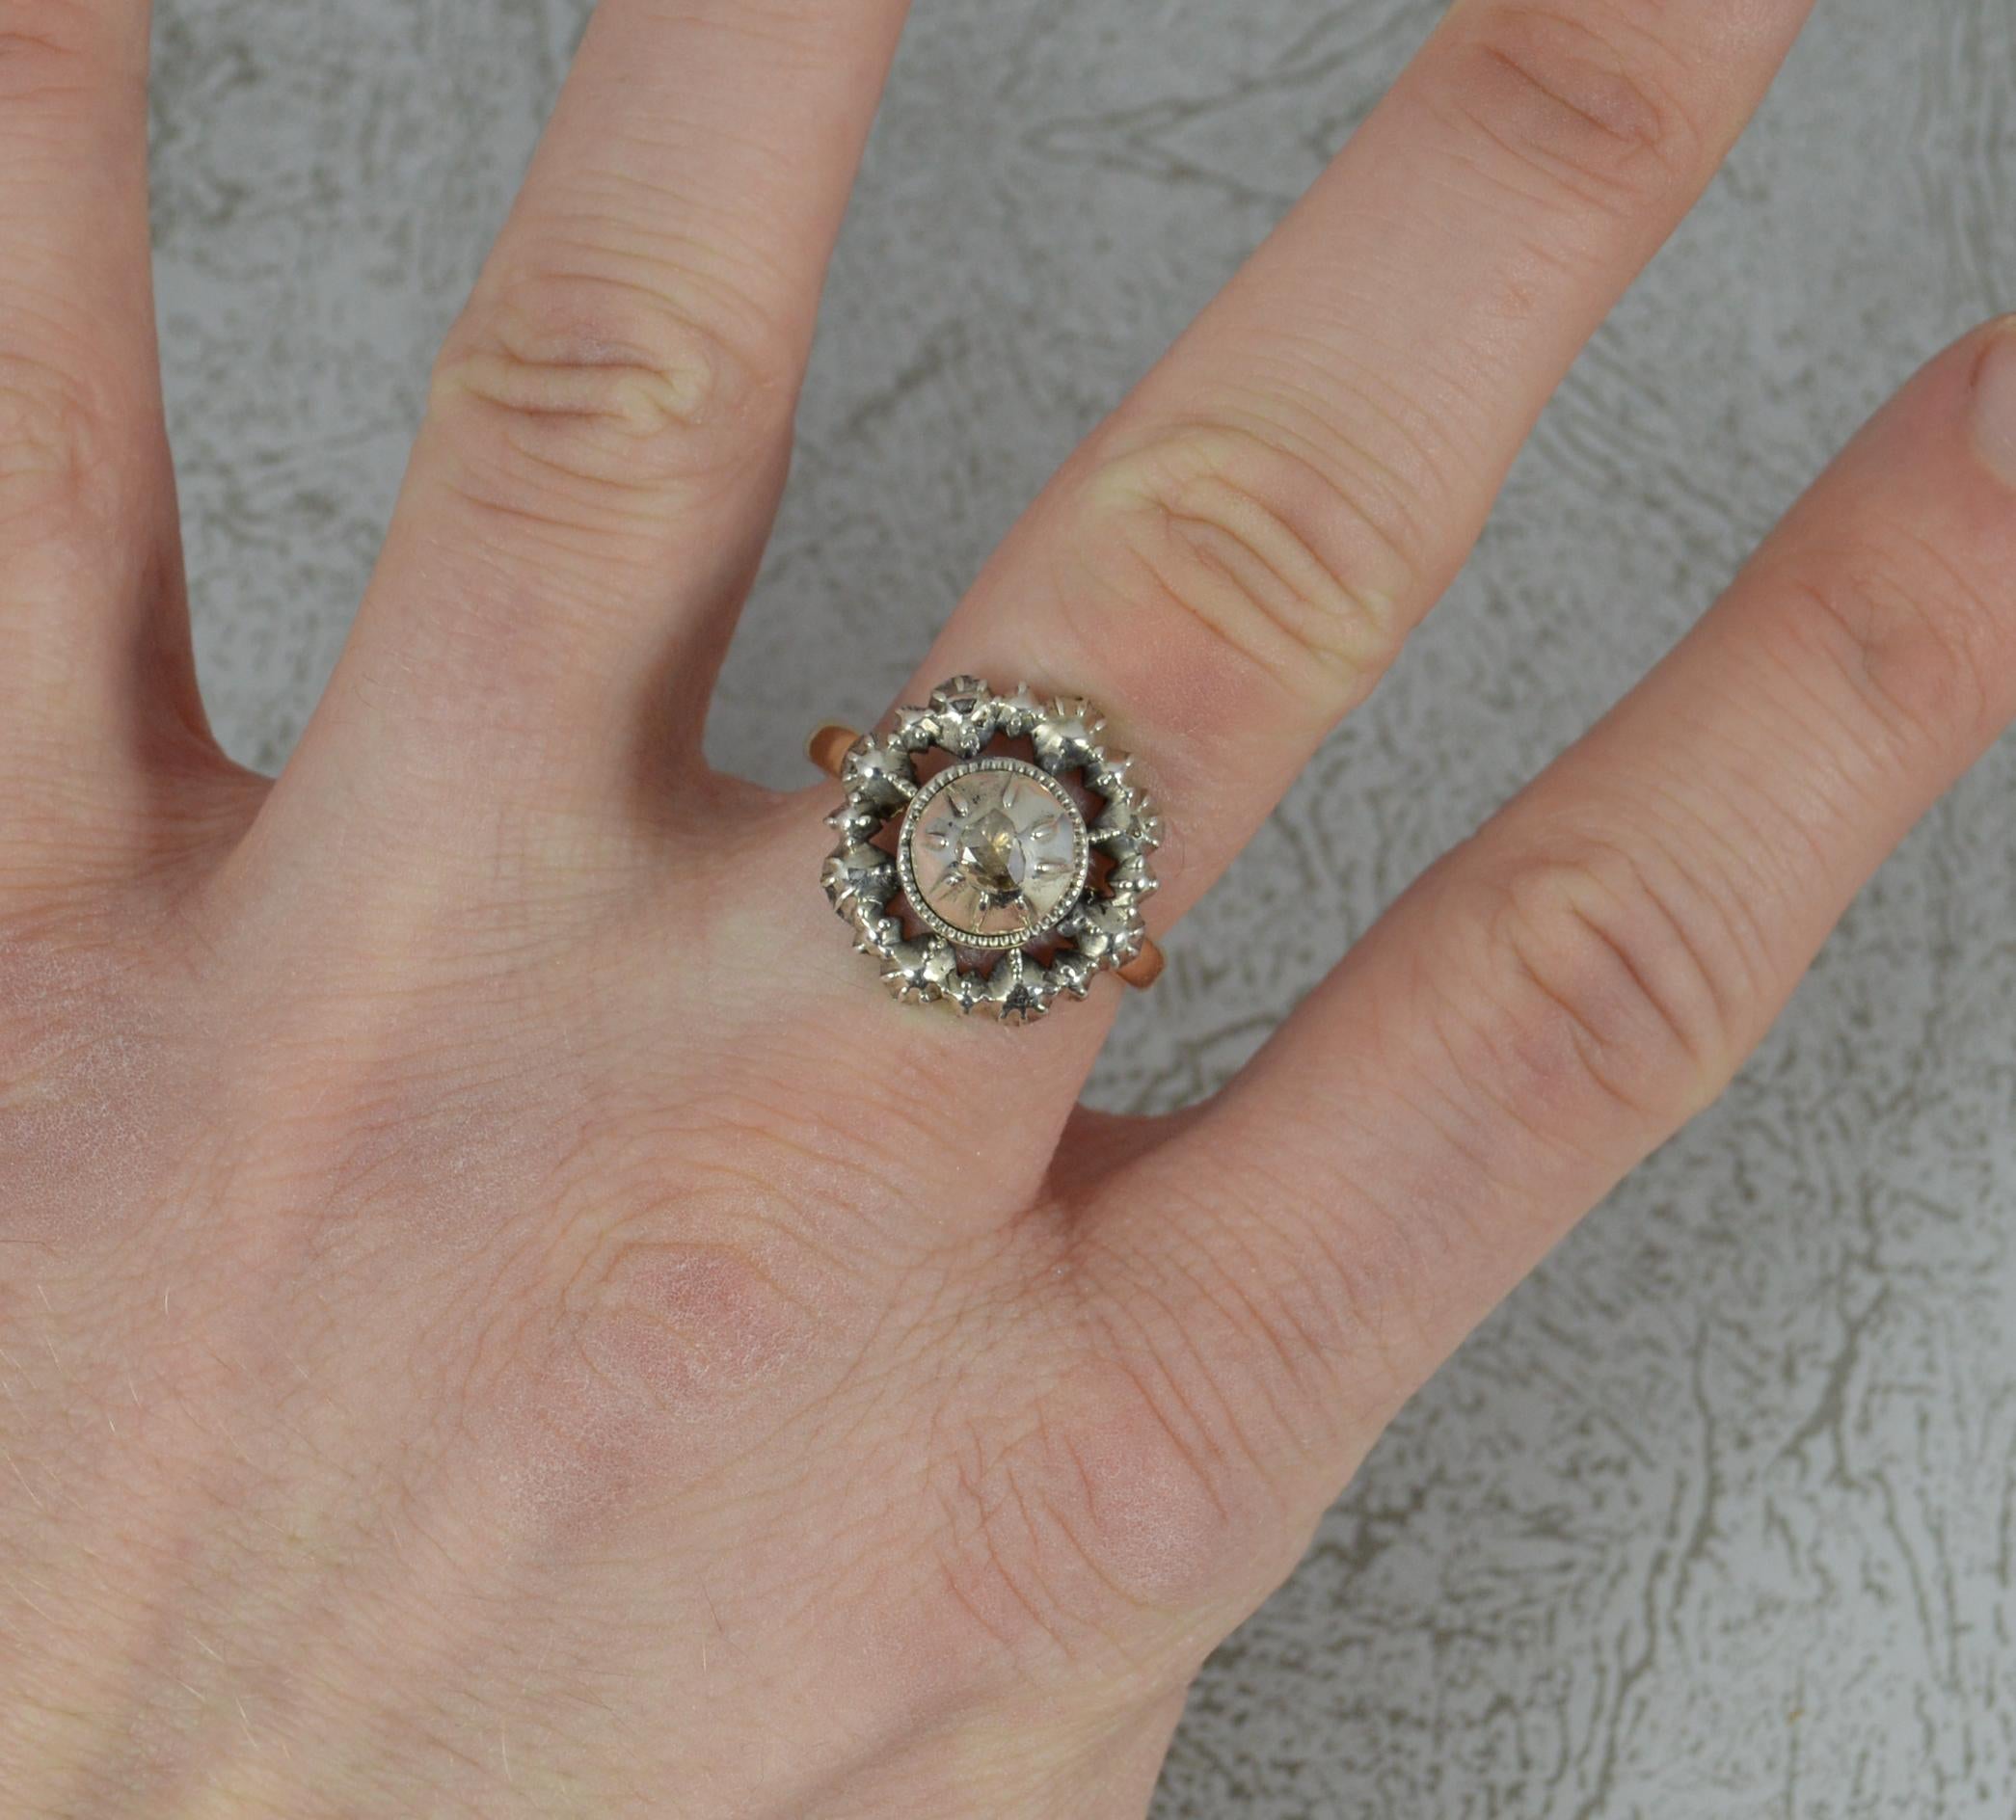 A very fine Georgian period ring. c1760-90.
Designed with a circular panel head in silver. 17.5mm diameter. Set with a rose cut diamond to centre with four smaller diamond chips to the border.
Complete on a 9k yellow gold shank.
Rare